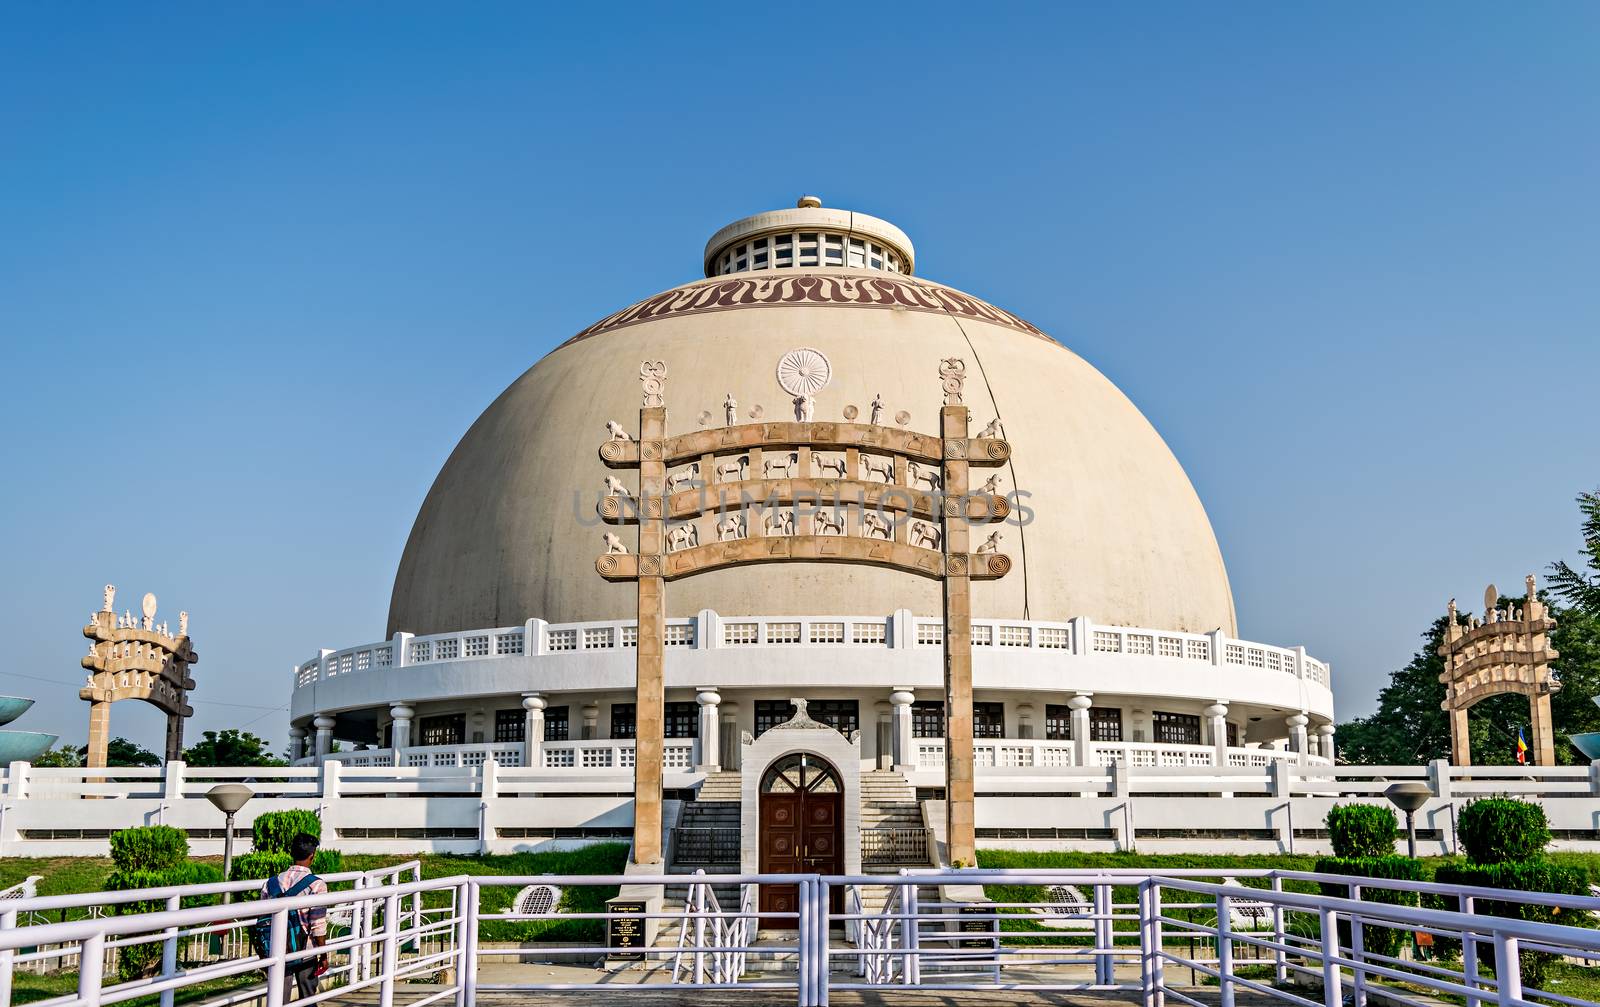 Deekshabhoomi is a sacred monument of Navayana Buddhism located where the architect of the Indian Constitution, B. R. Ambedkar, converted to Buddhism with approximately 600,000 followers .